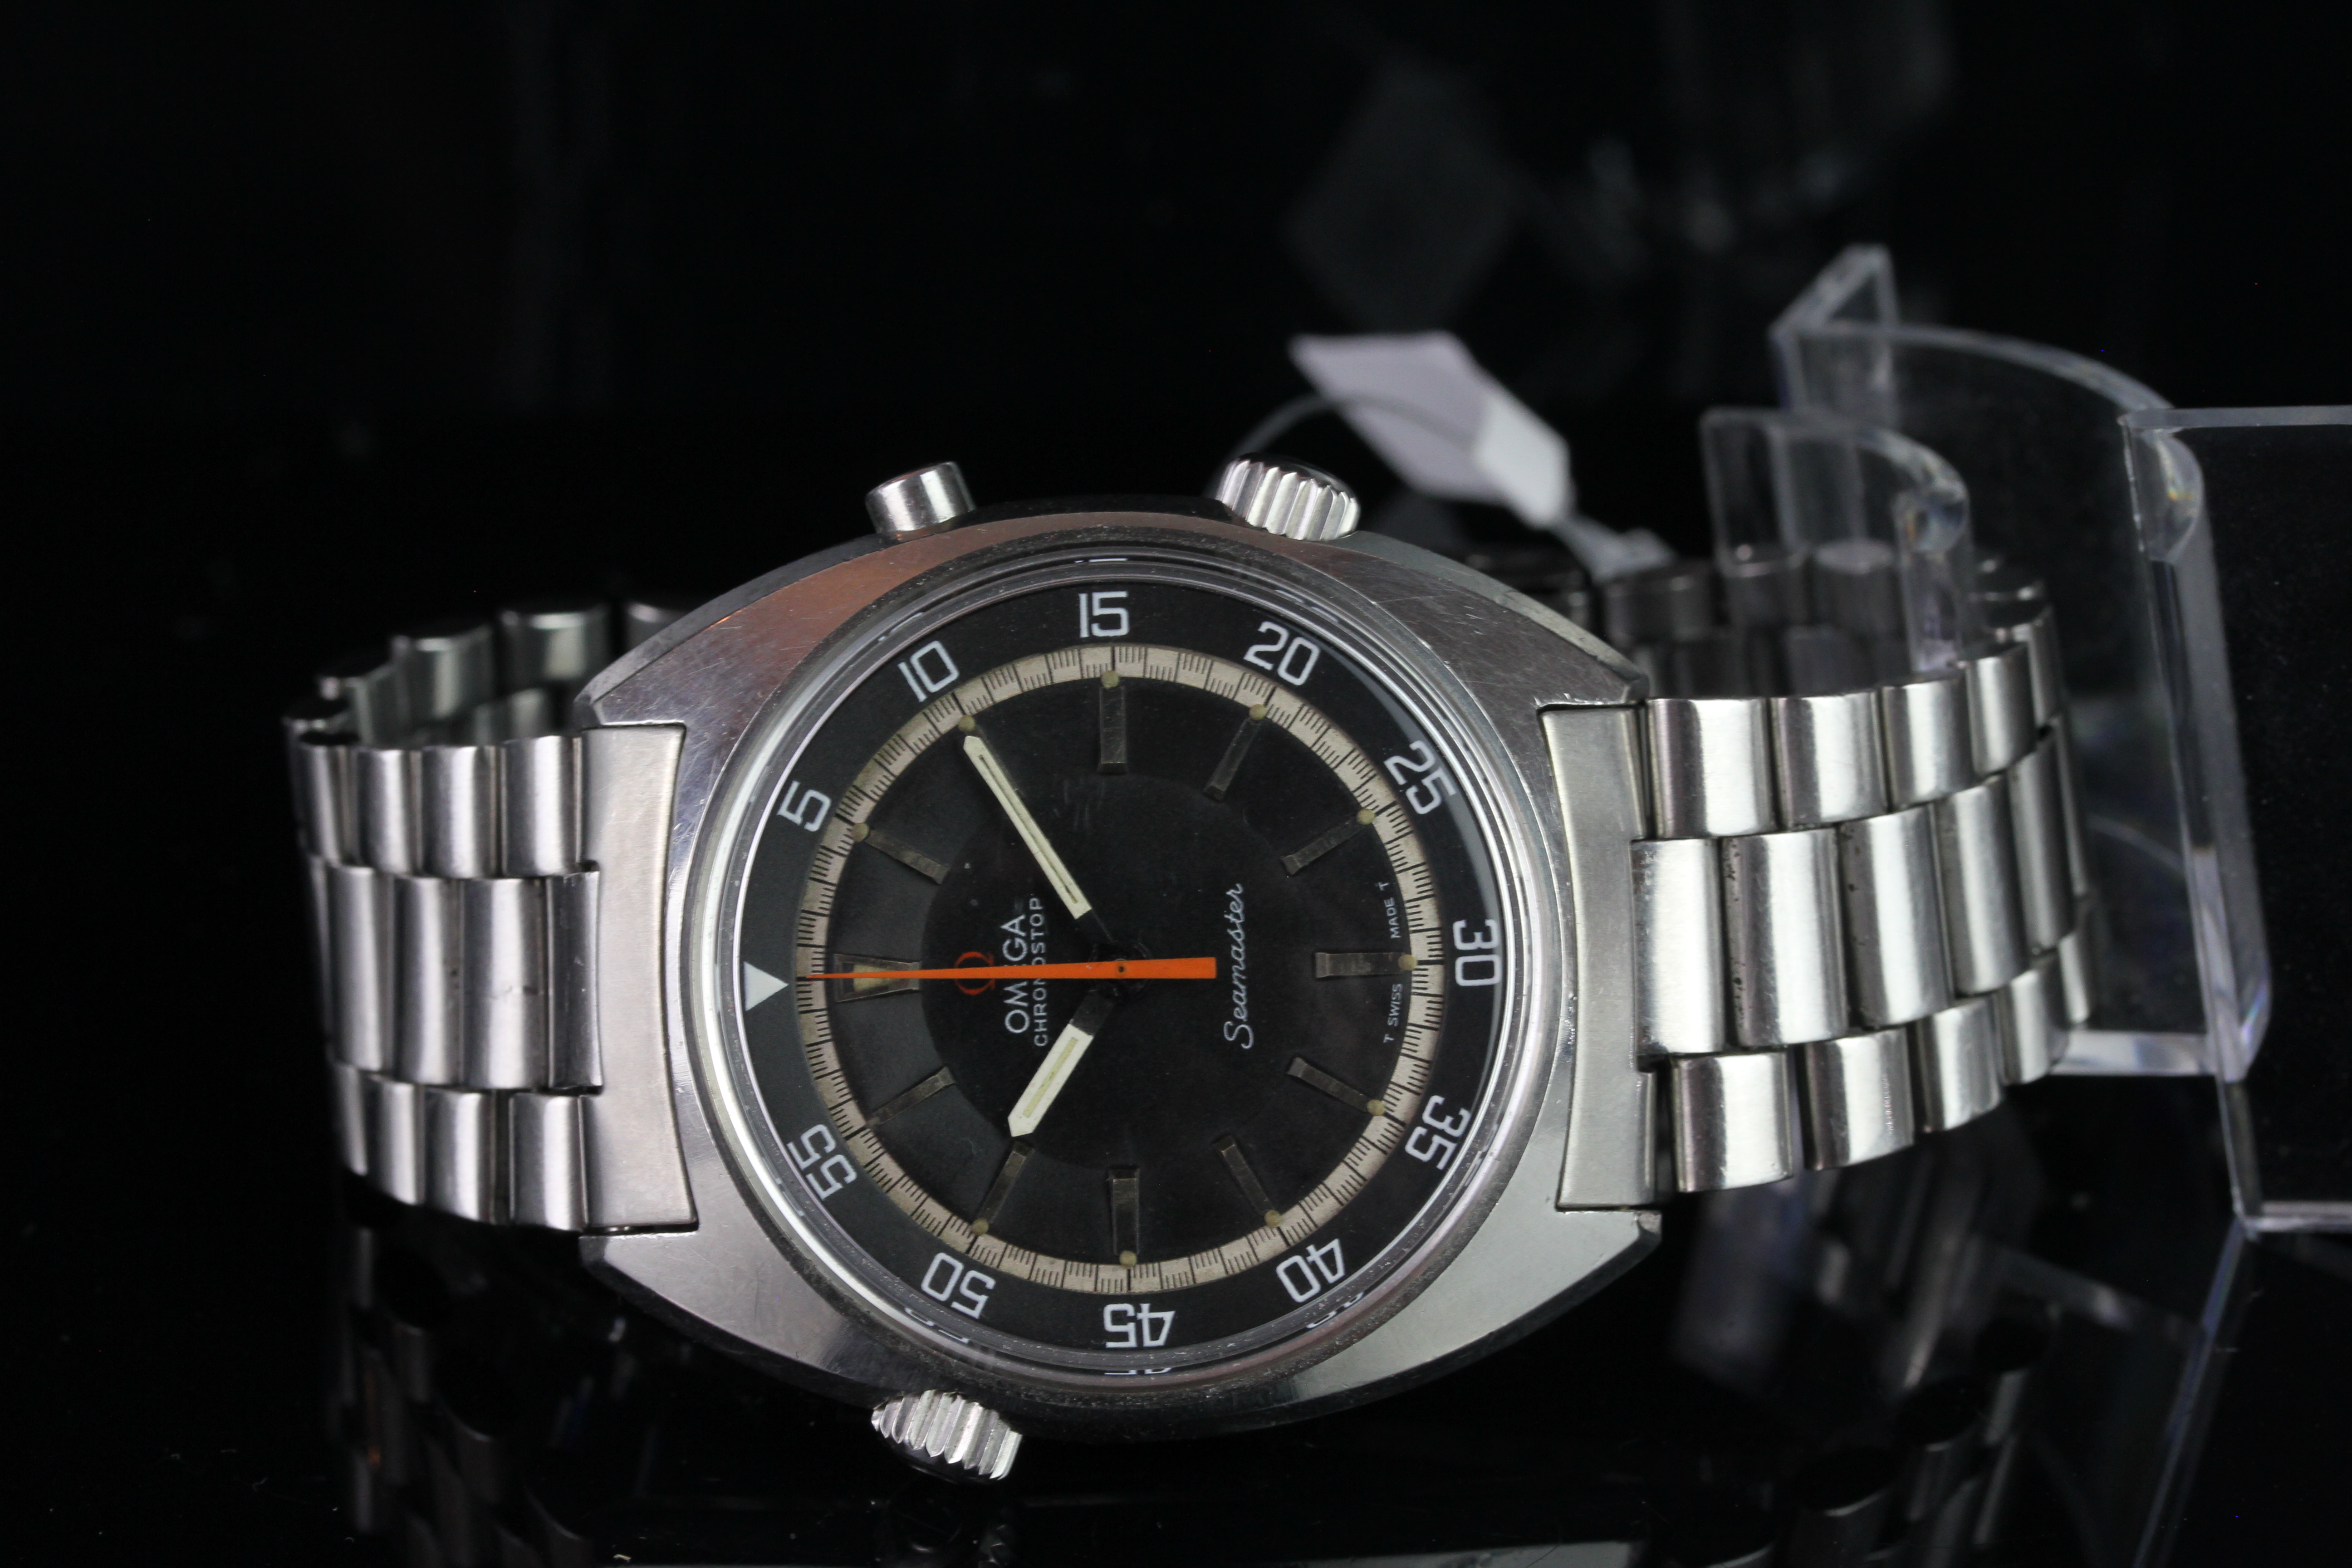 GENTLEMEN'S OMEGA SEAMASTER , round, black dial with illuminated hands and orange second hand,